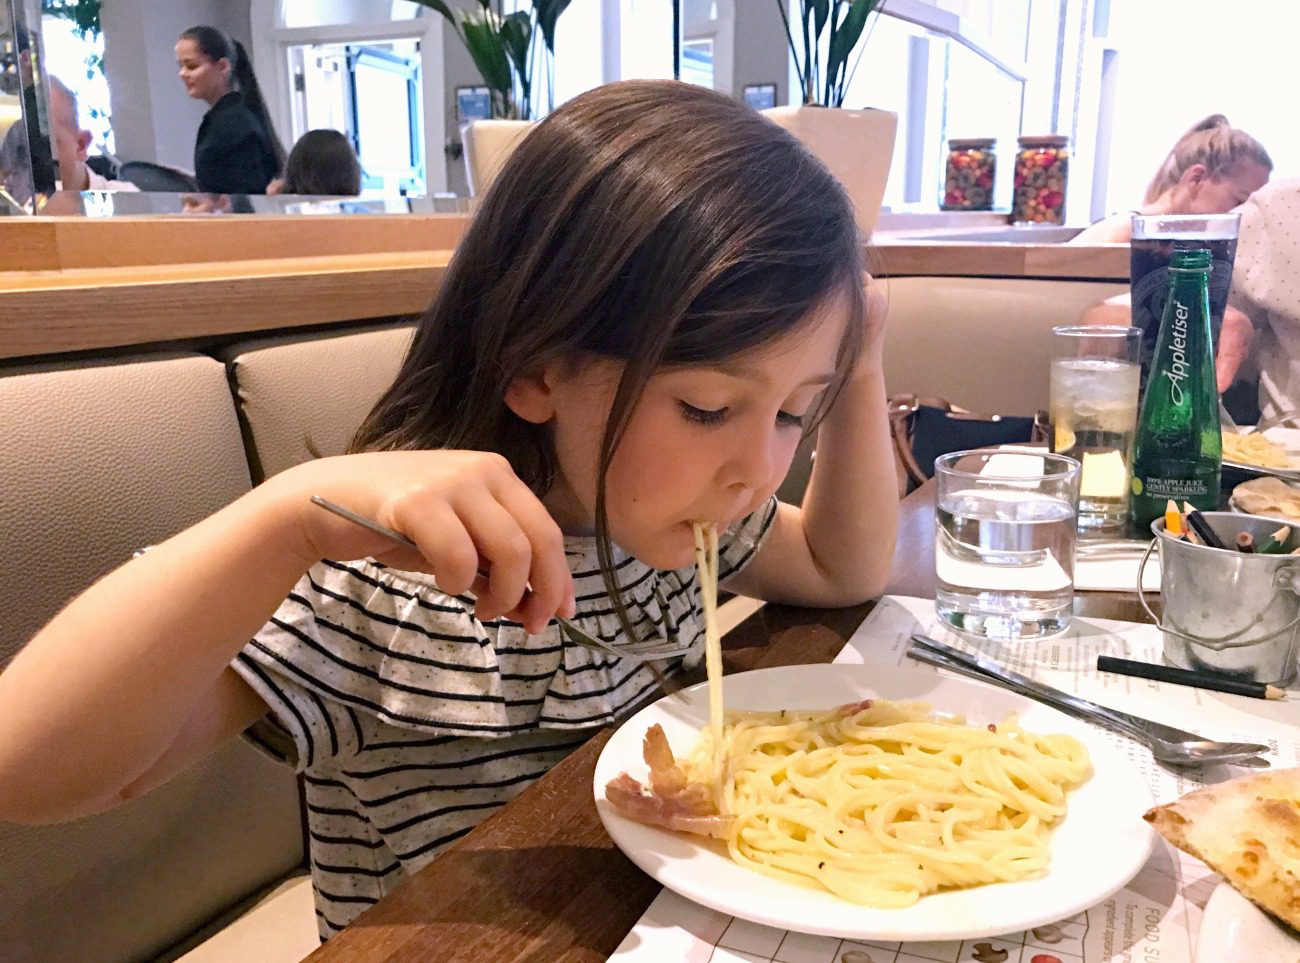 We went to check out the Prezzo La Famiglia sharing bowls that are new at Prezzo to bring the family together over a lovely meal. Find out what we thought.